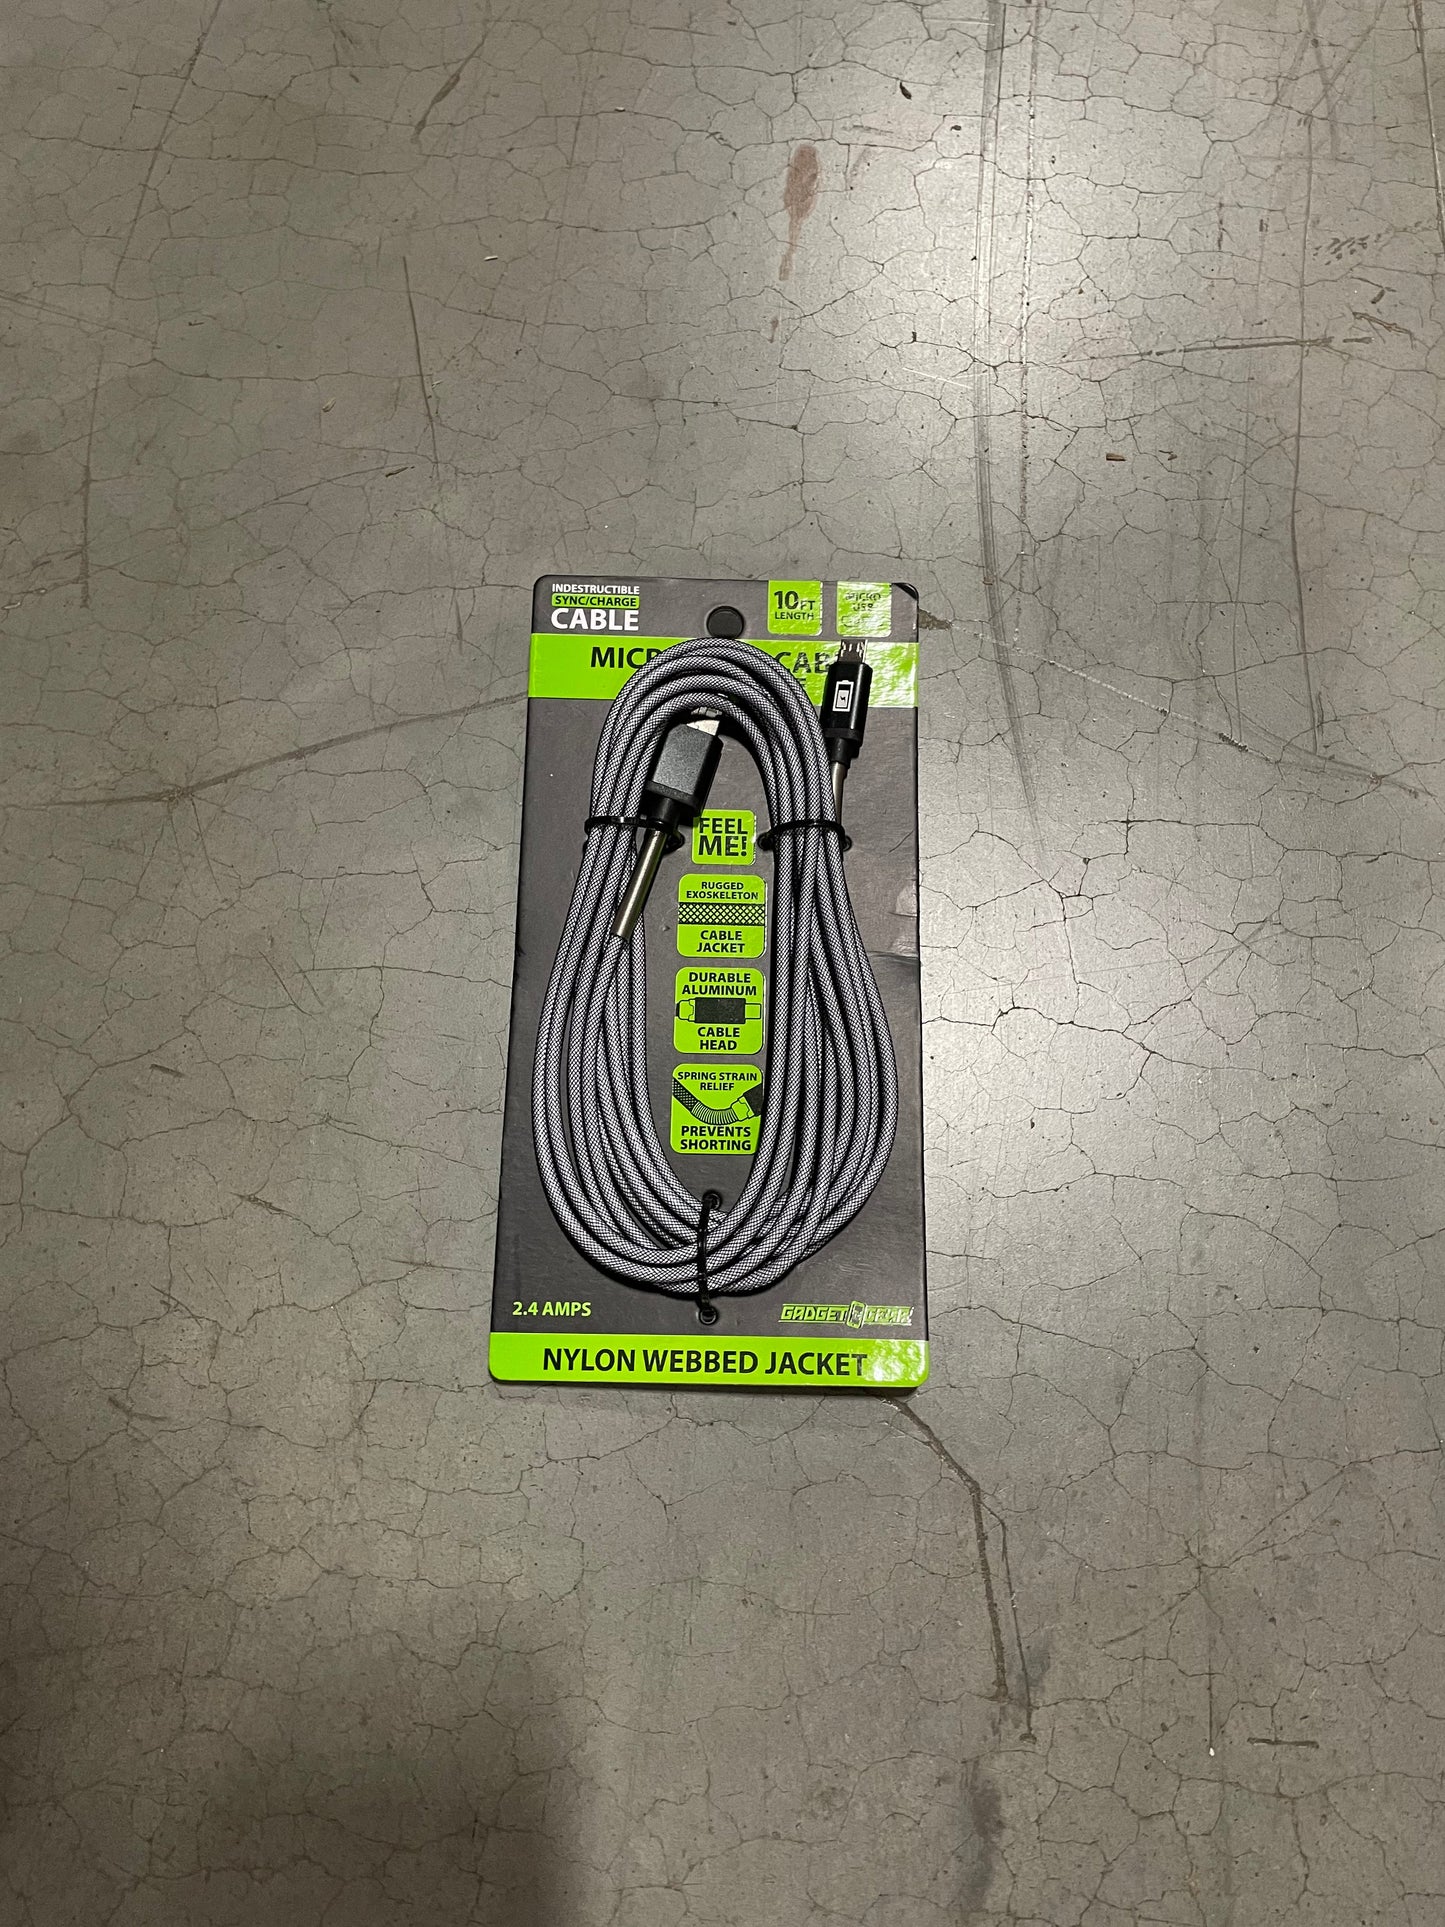 ITEM NUMBER 088294 10FT INDESTRUCTIBLE CHARGE CABLES 6 PIECES PER DISPLAY